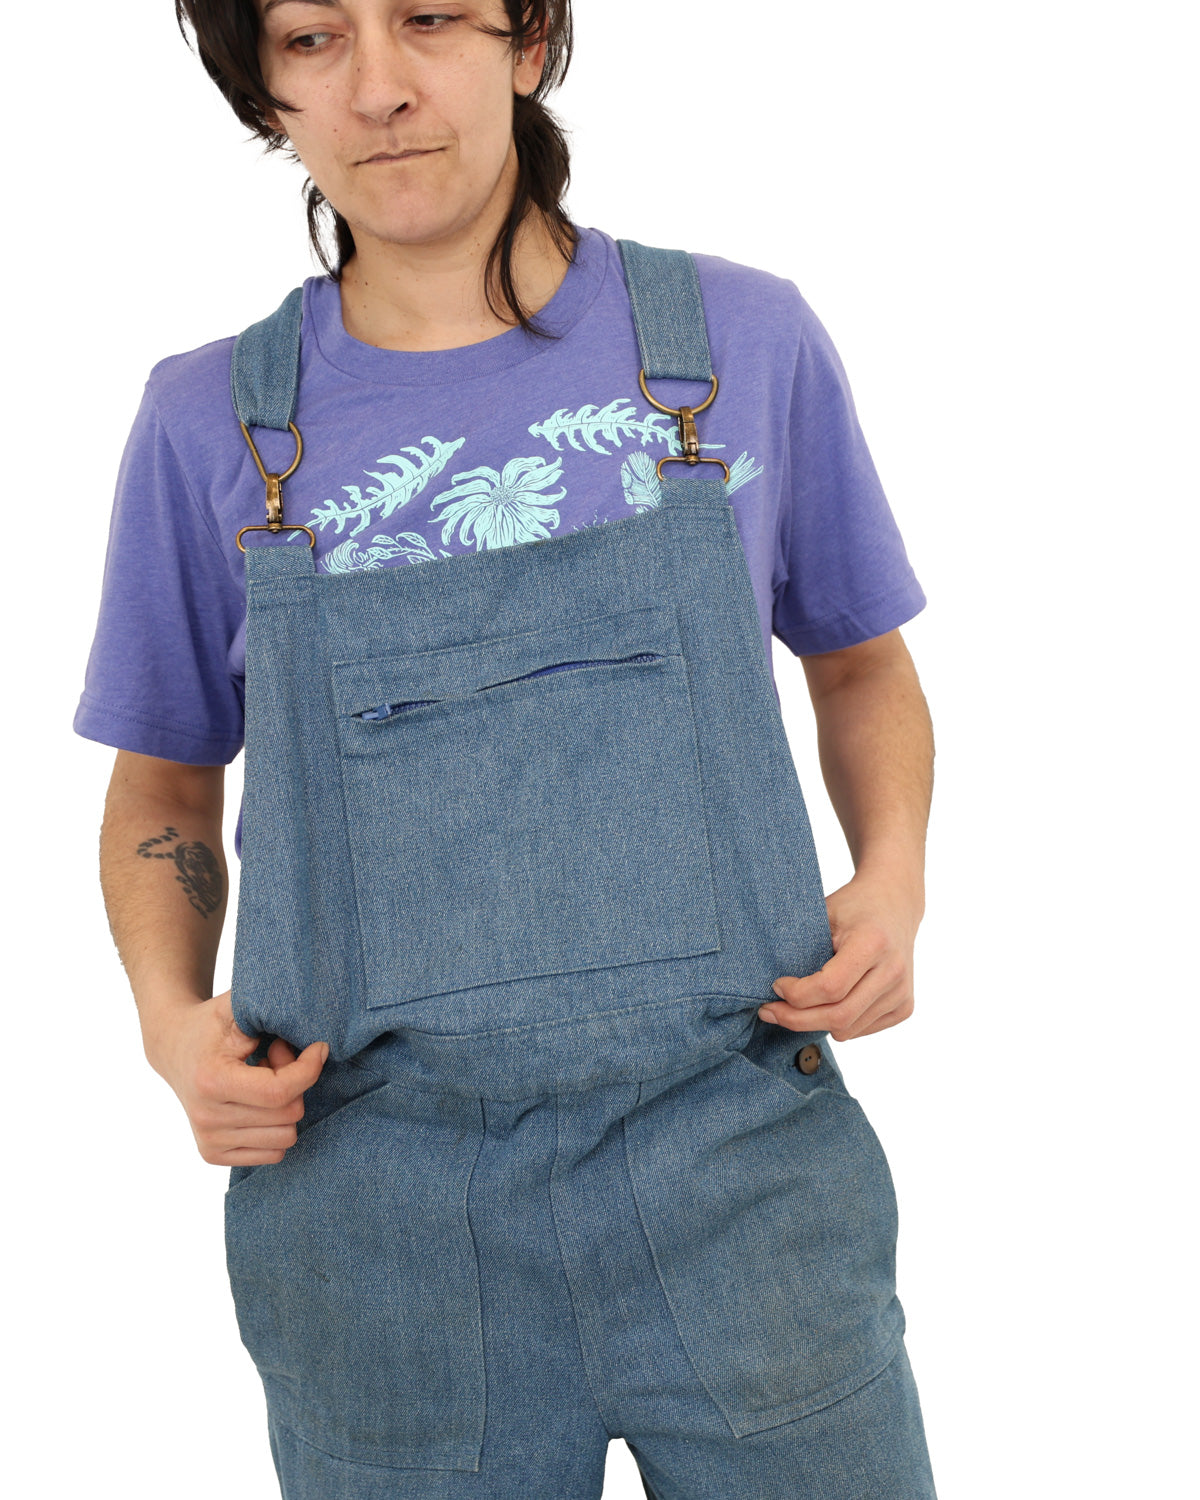 Woman wearing a light purple colored t-shirt with light blue ink of flowers, ferns, feathers, shells, etc